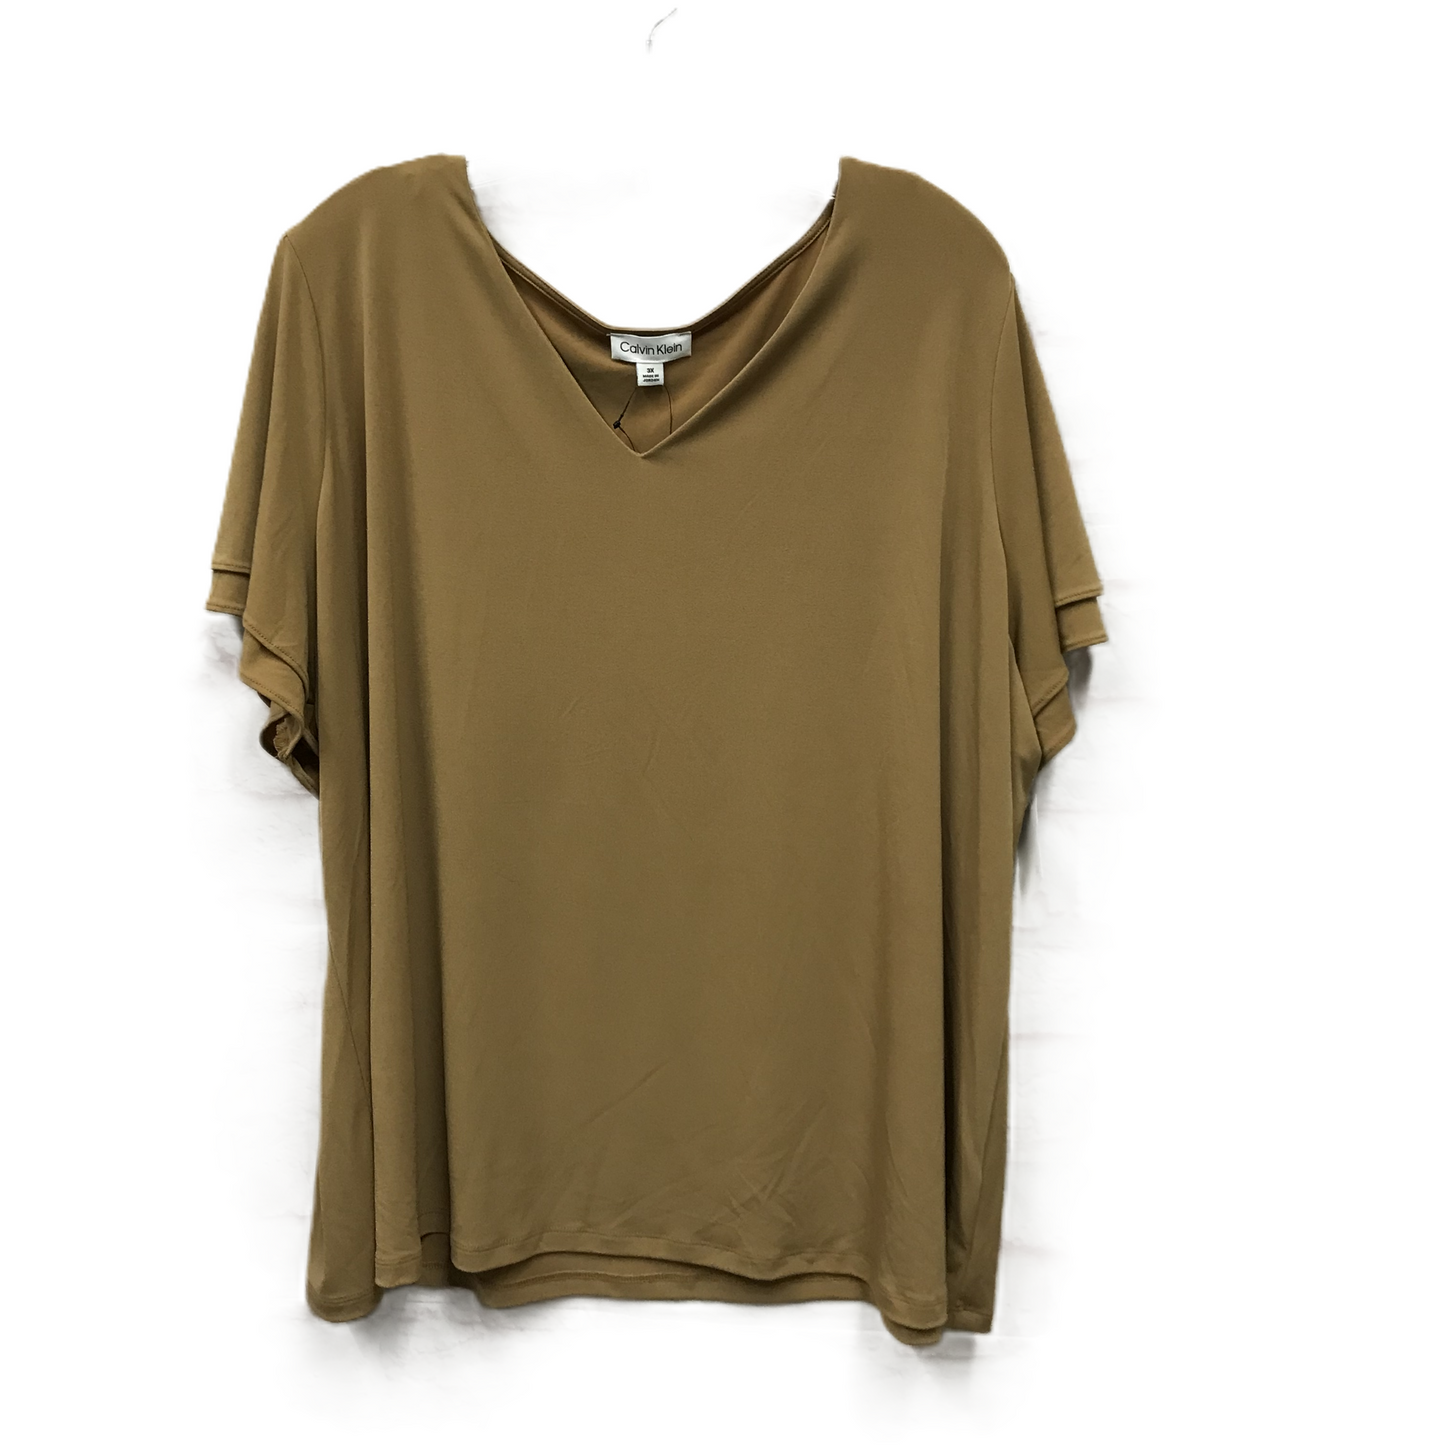 Brown Top Short Sleeve By Calvin Klein, Size: 3x